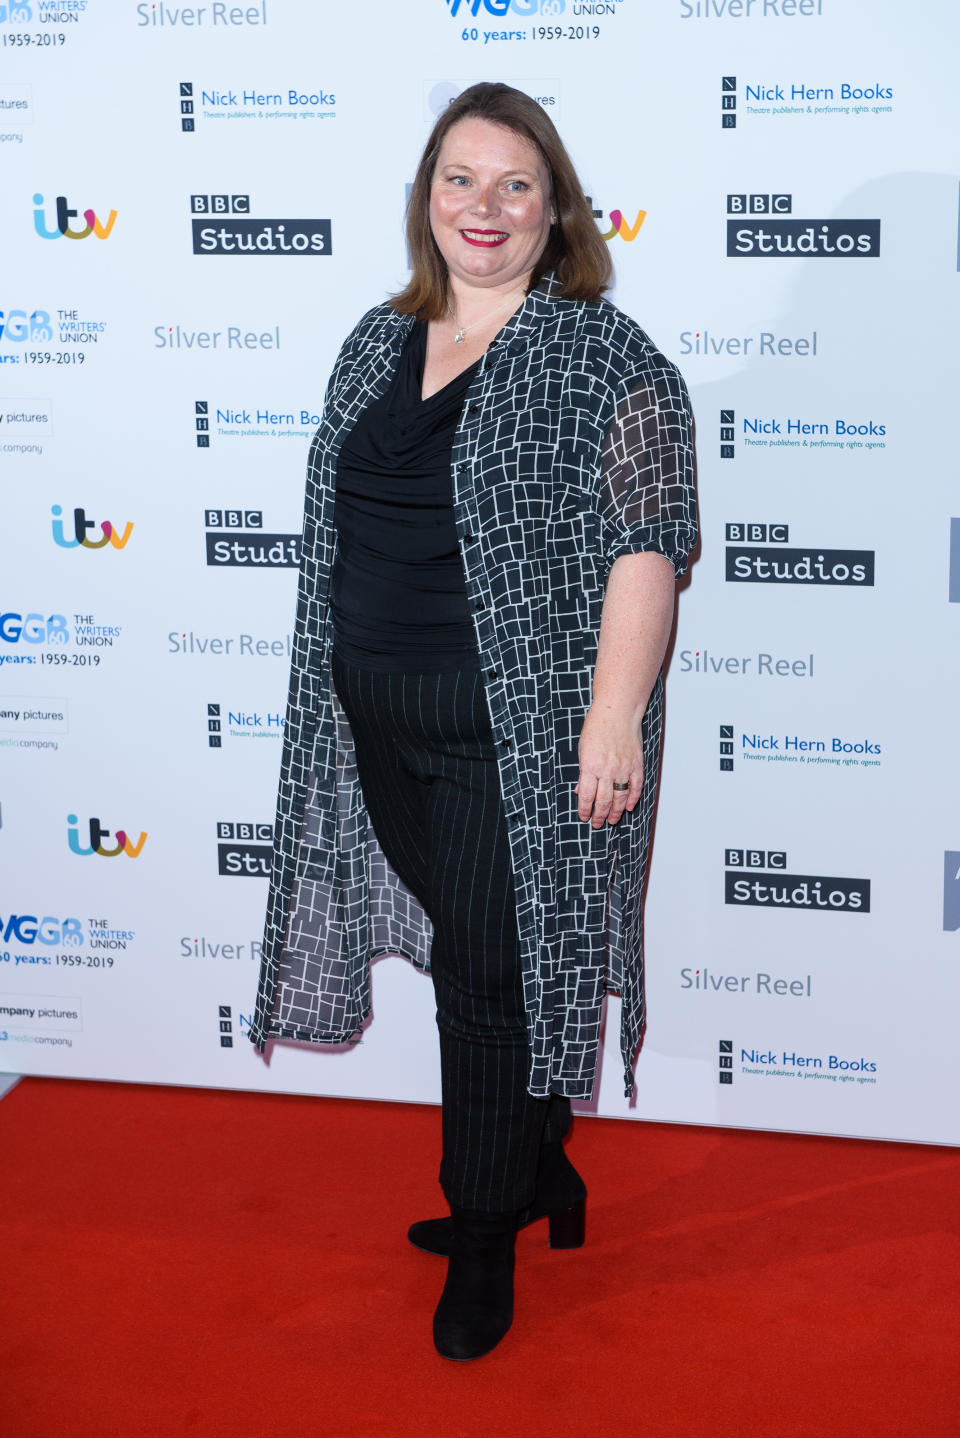 Joanna Scanlan attends the Writers' Guild Awards 2019 held at Royal College Of Physicians on January 14, 2019 in London, England. (Photo by Joe Maher/WireImage)